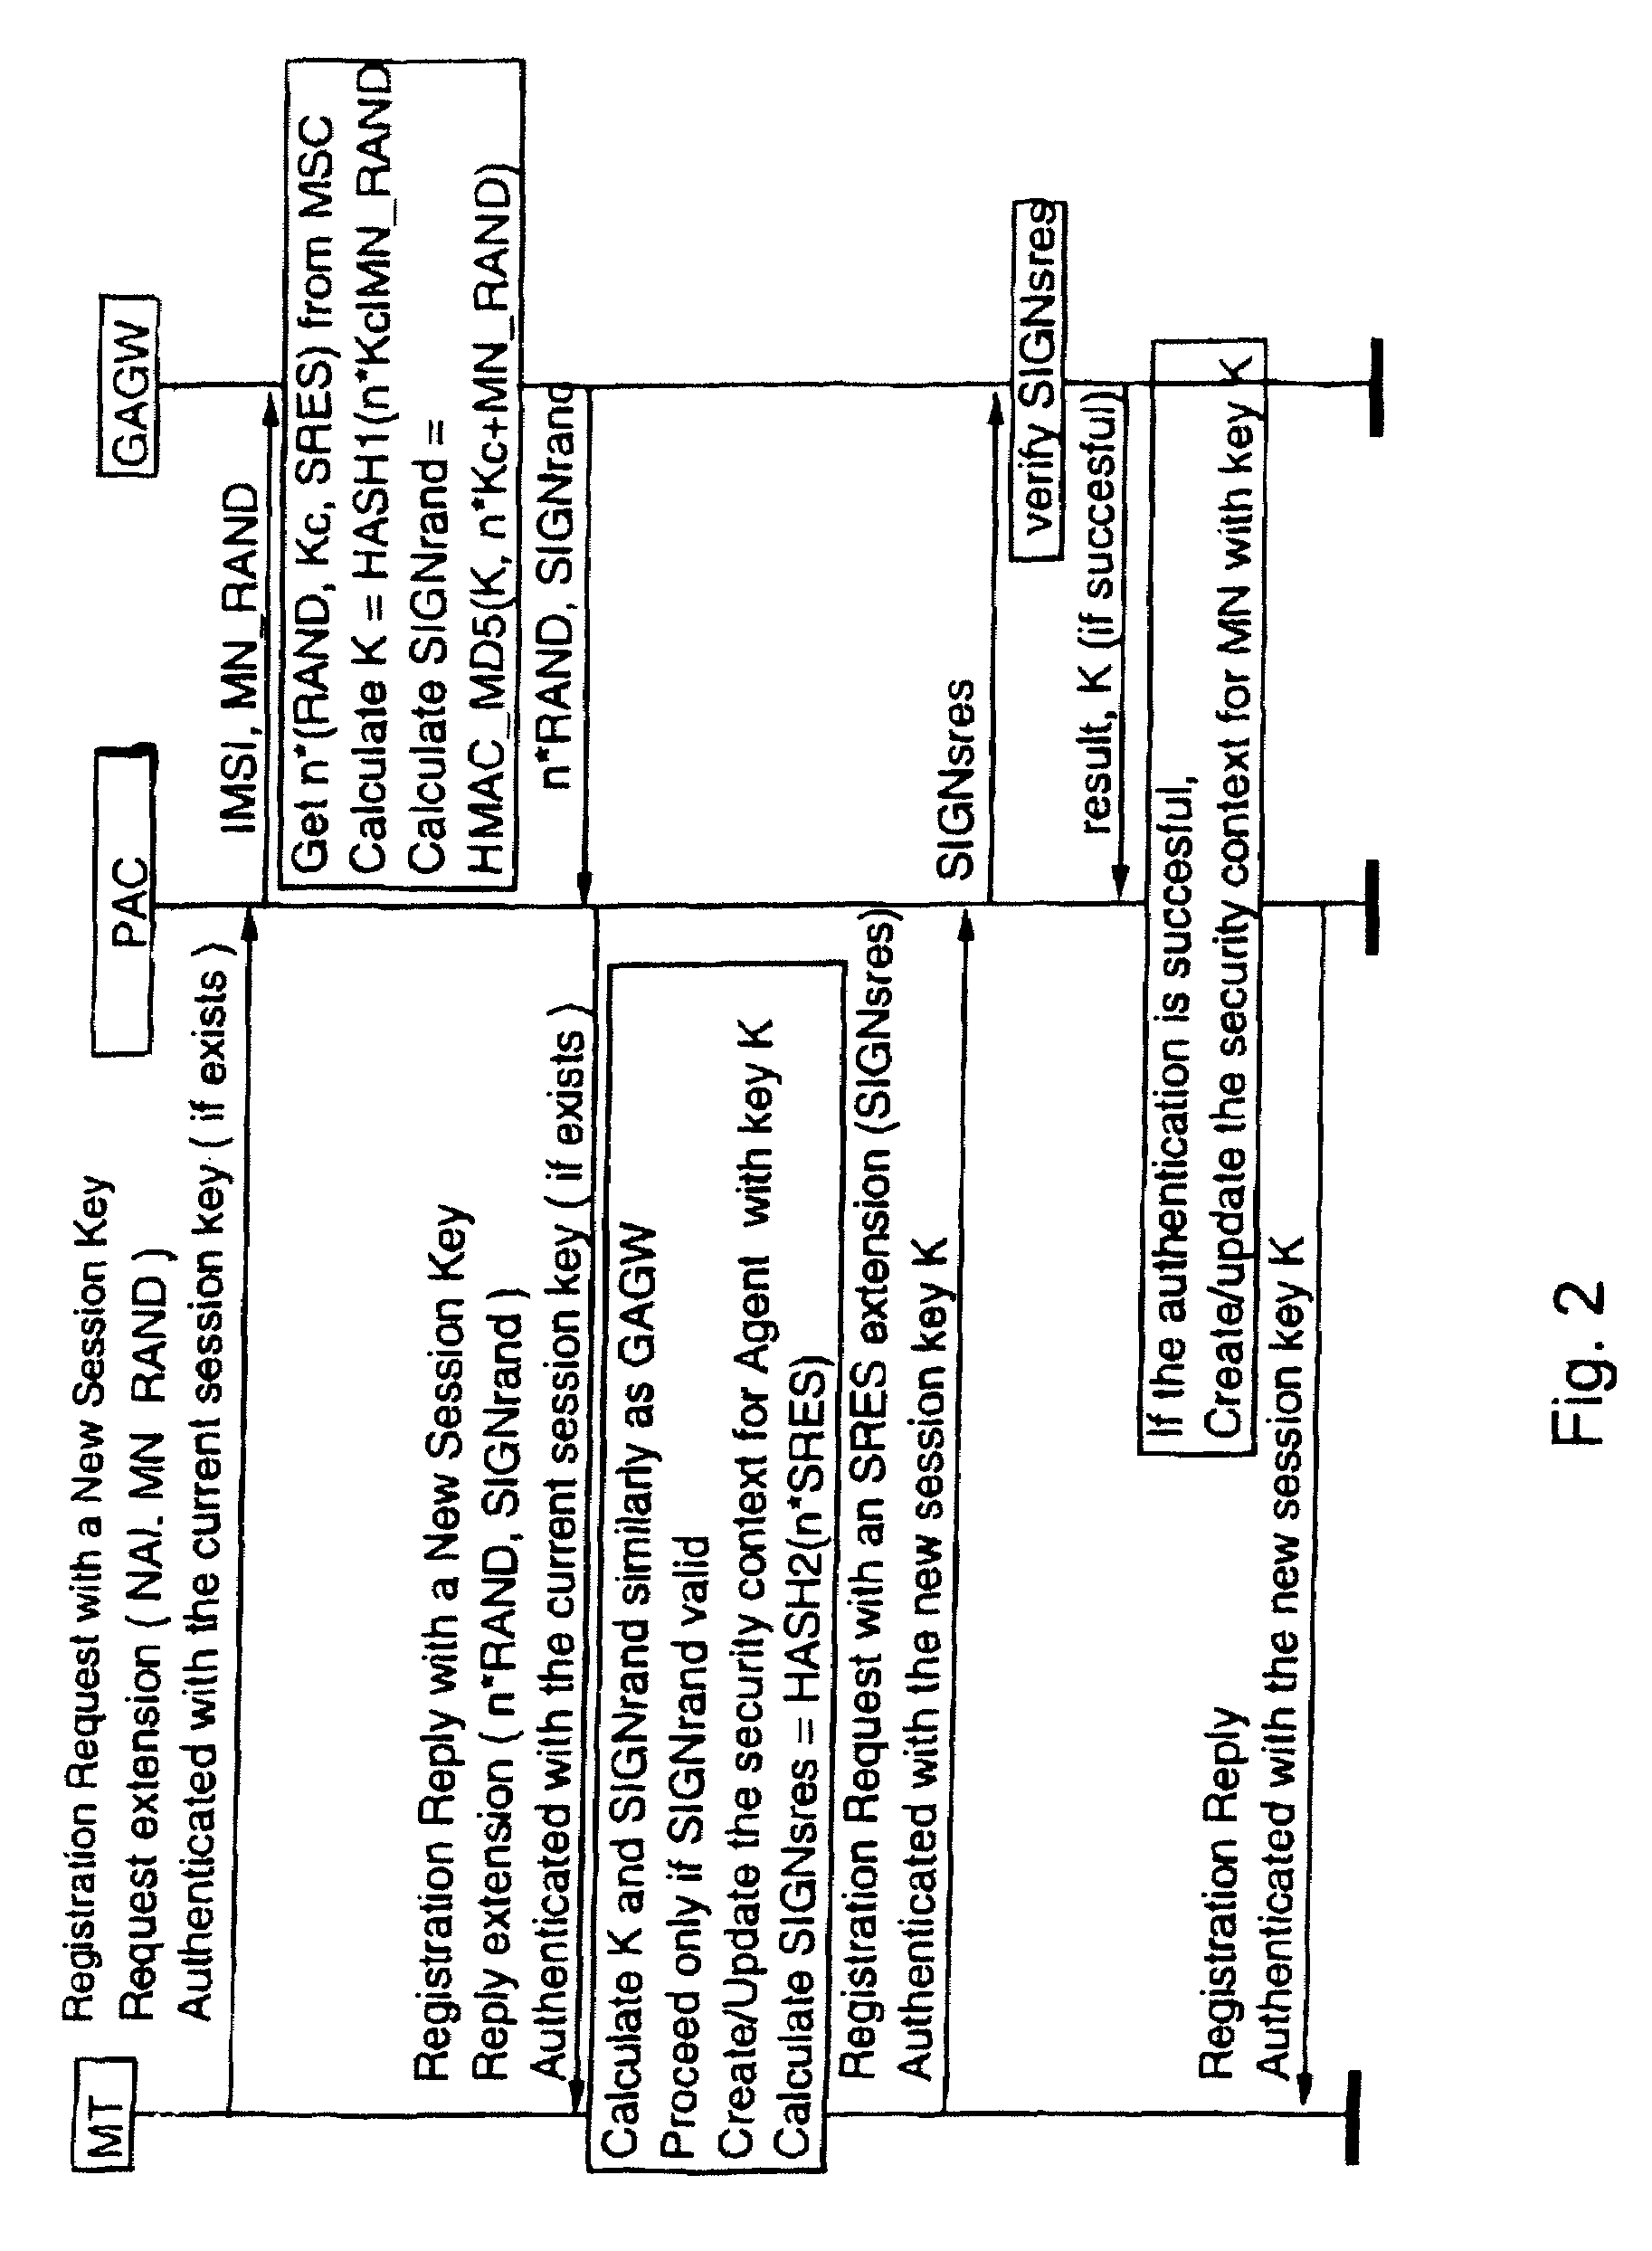 Authentication in a packet data network